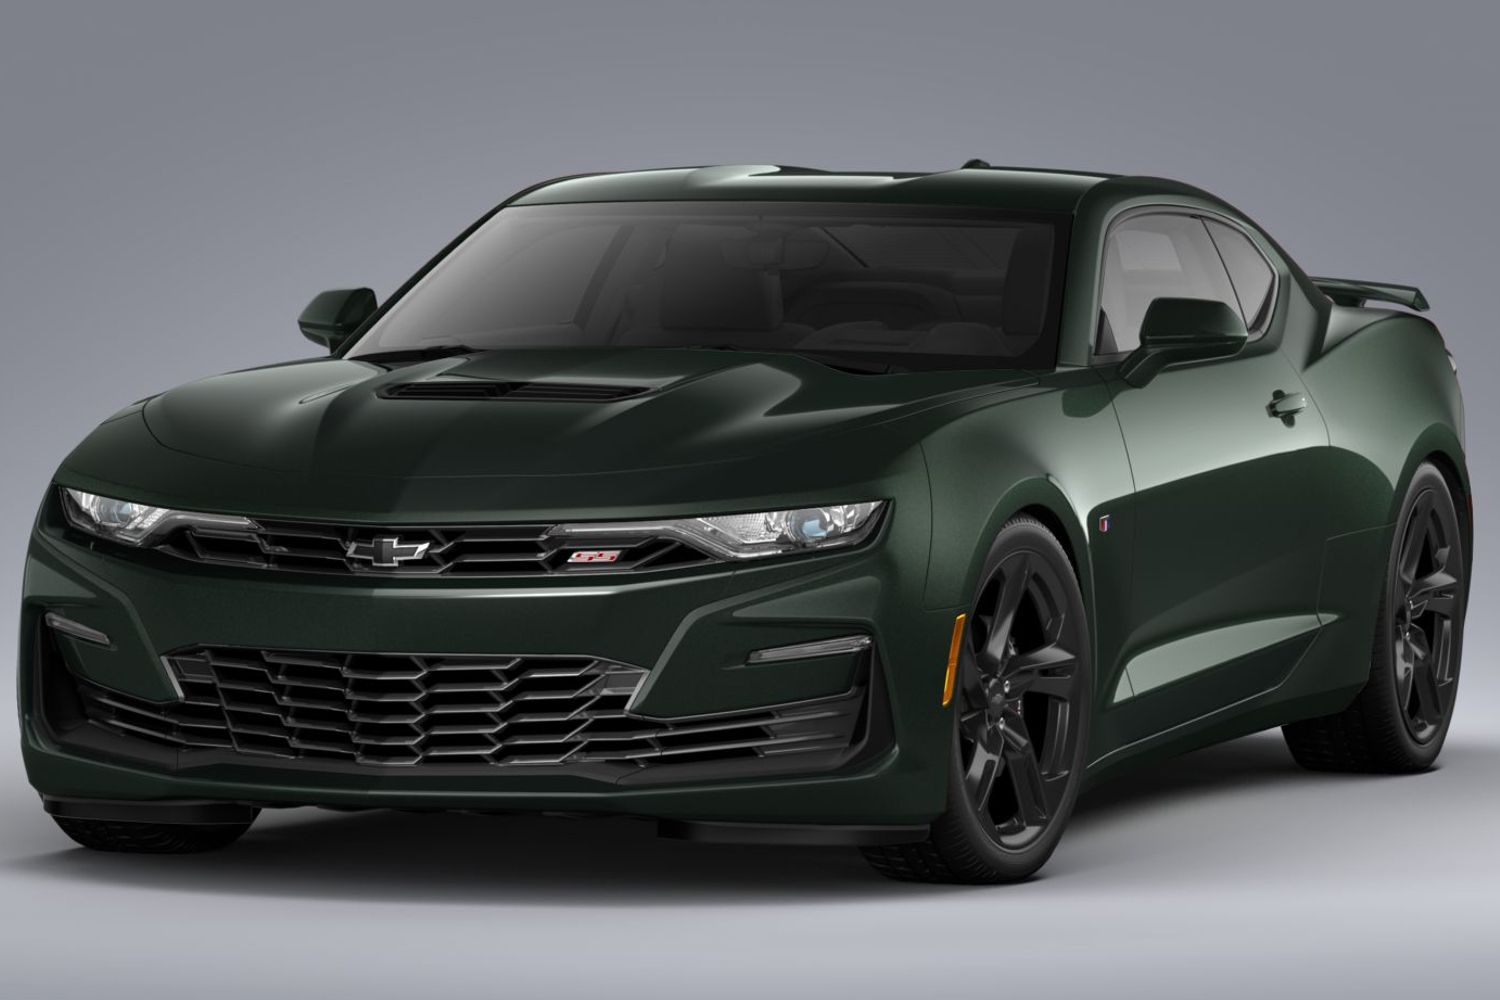 Camaro: Here's What's New And Different